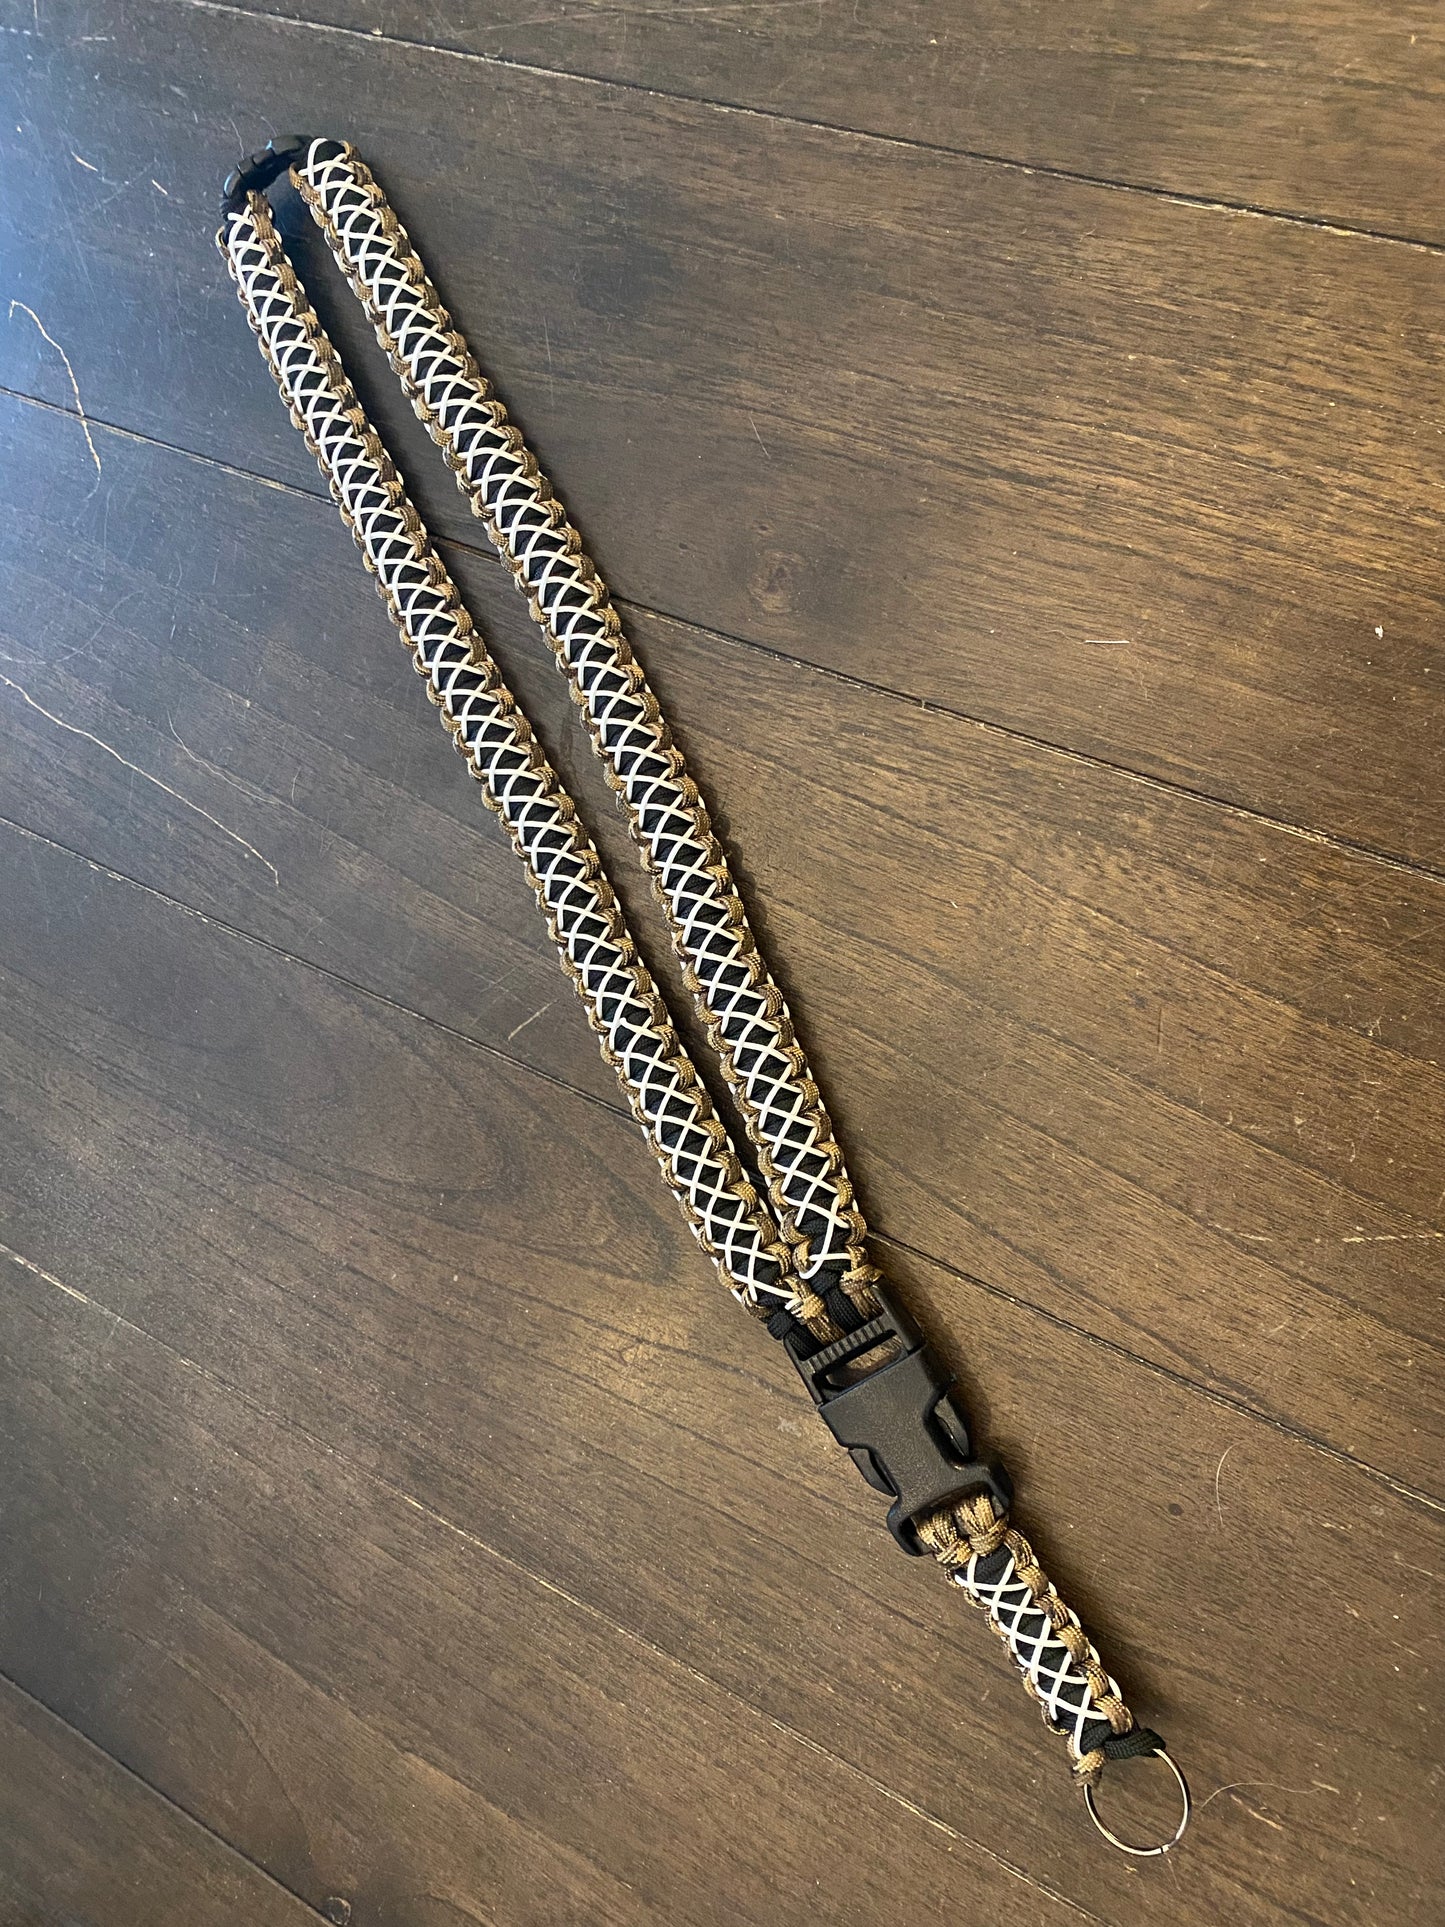 Premade Paracord Laced Cobra Lanyard, FDE Camo, Black, and Glow-in-the-dark microcord